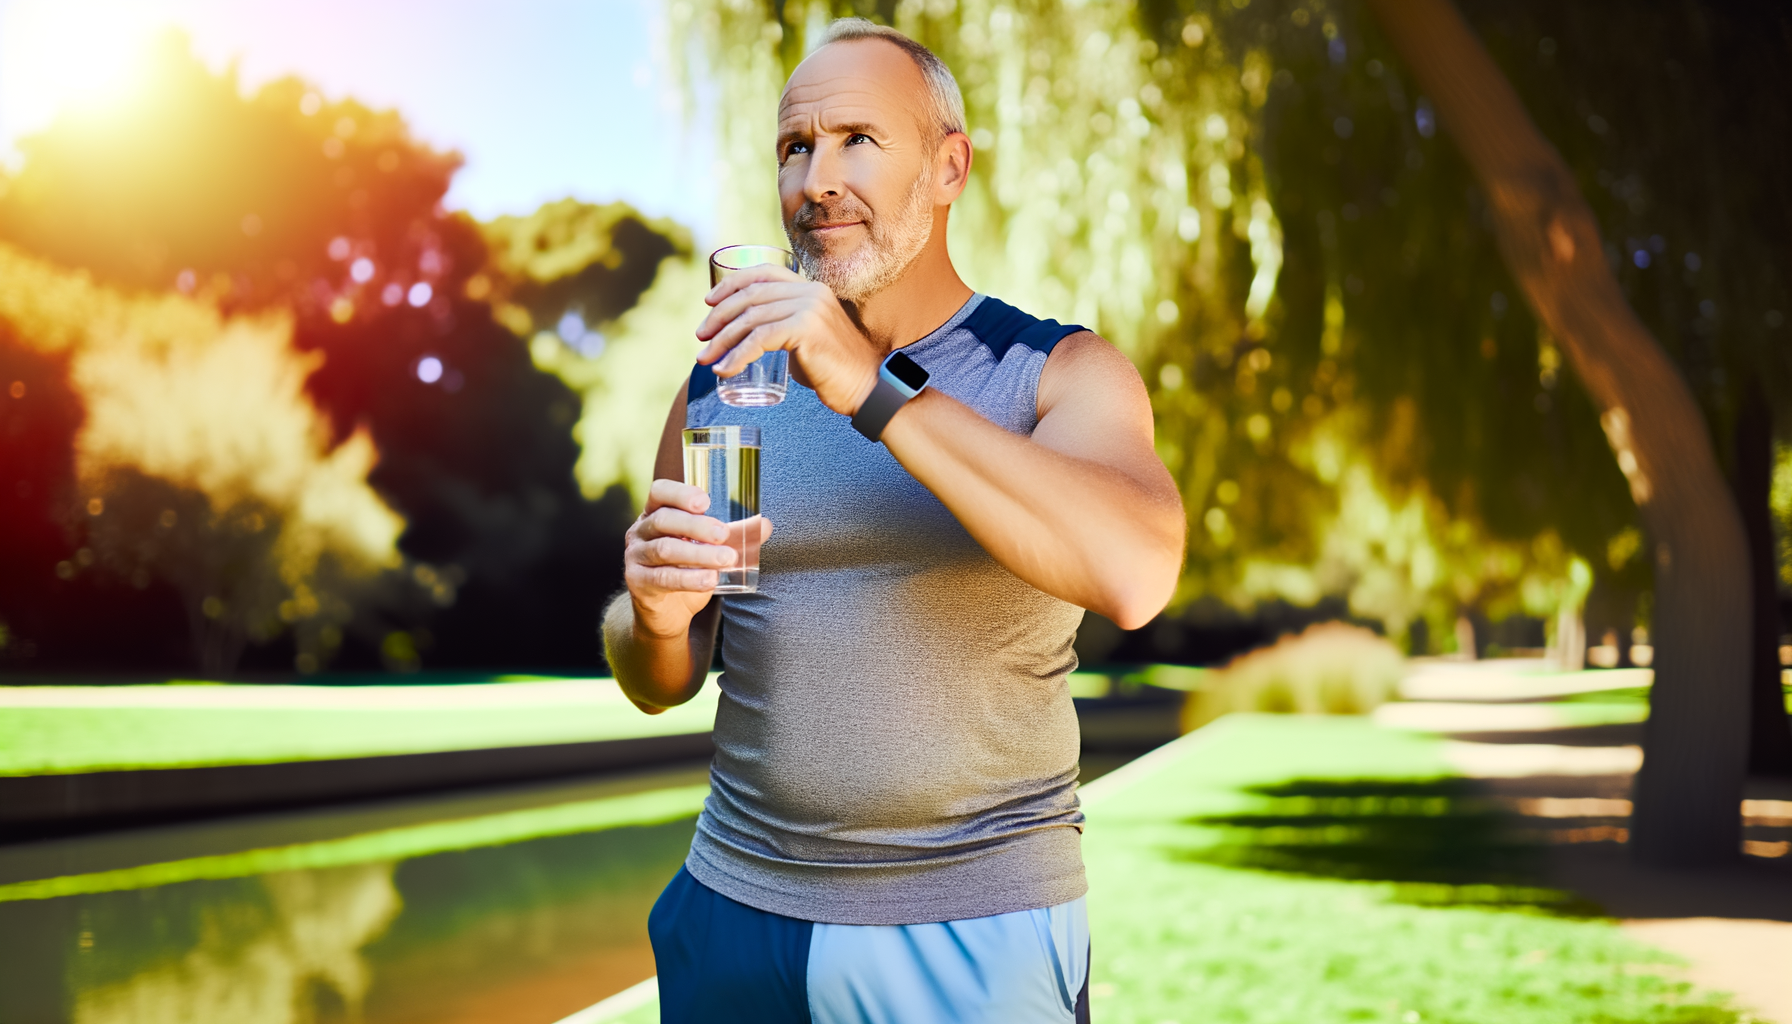 Hydration for Health: Why Water Matters More As You Age